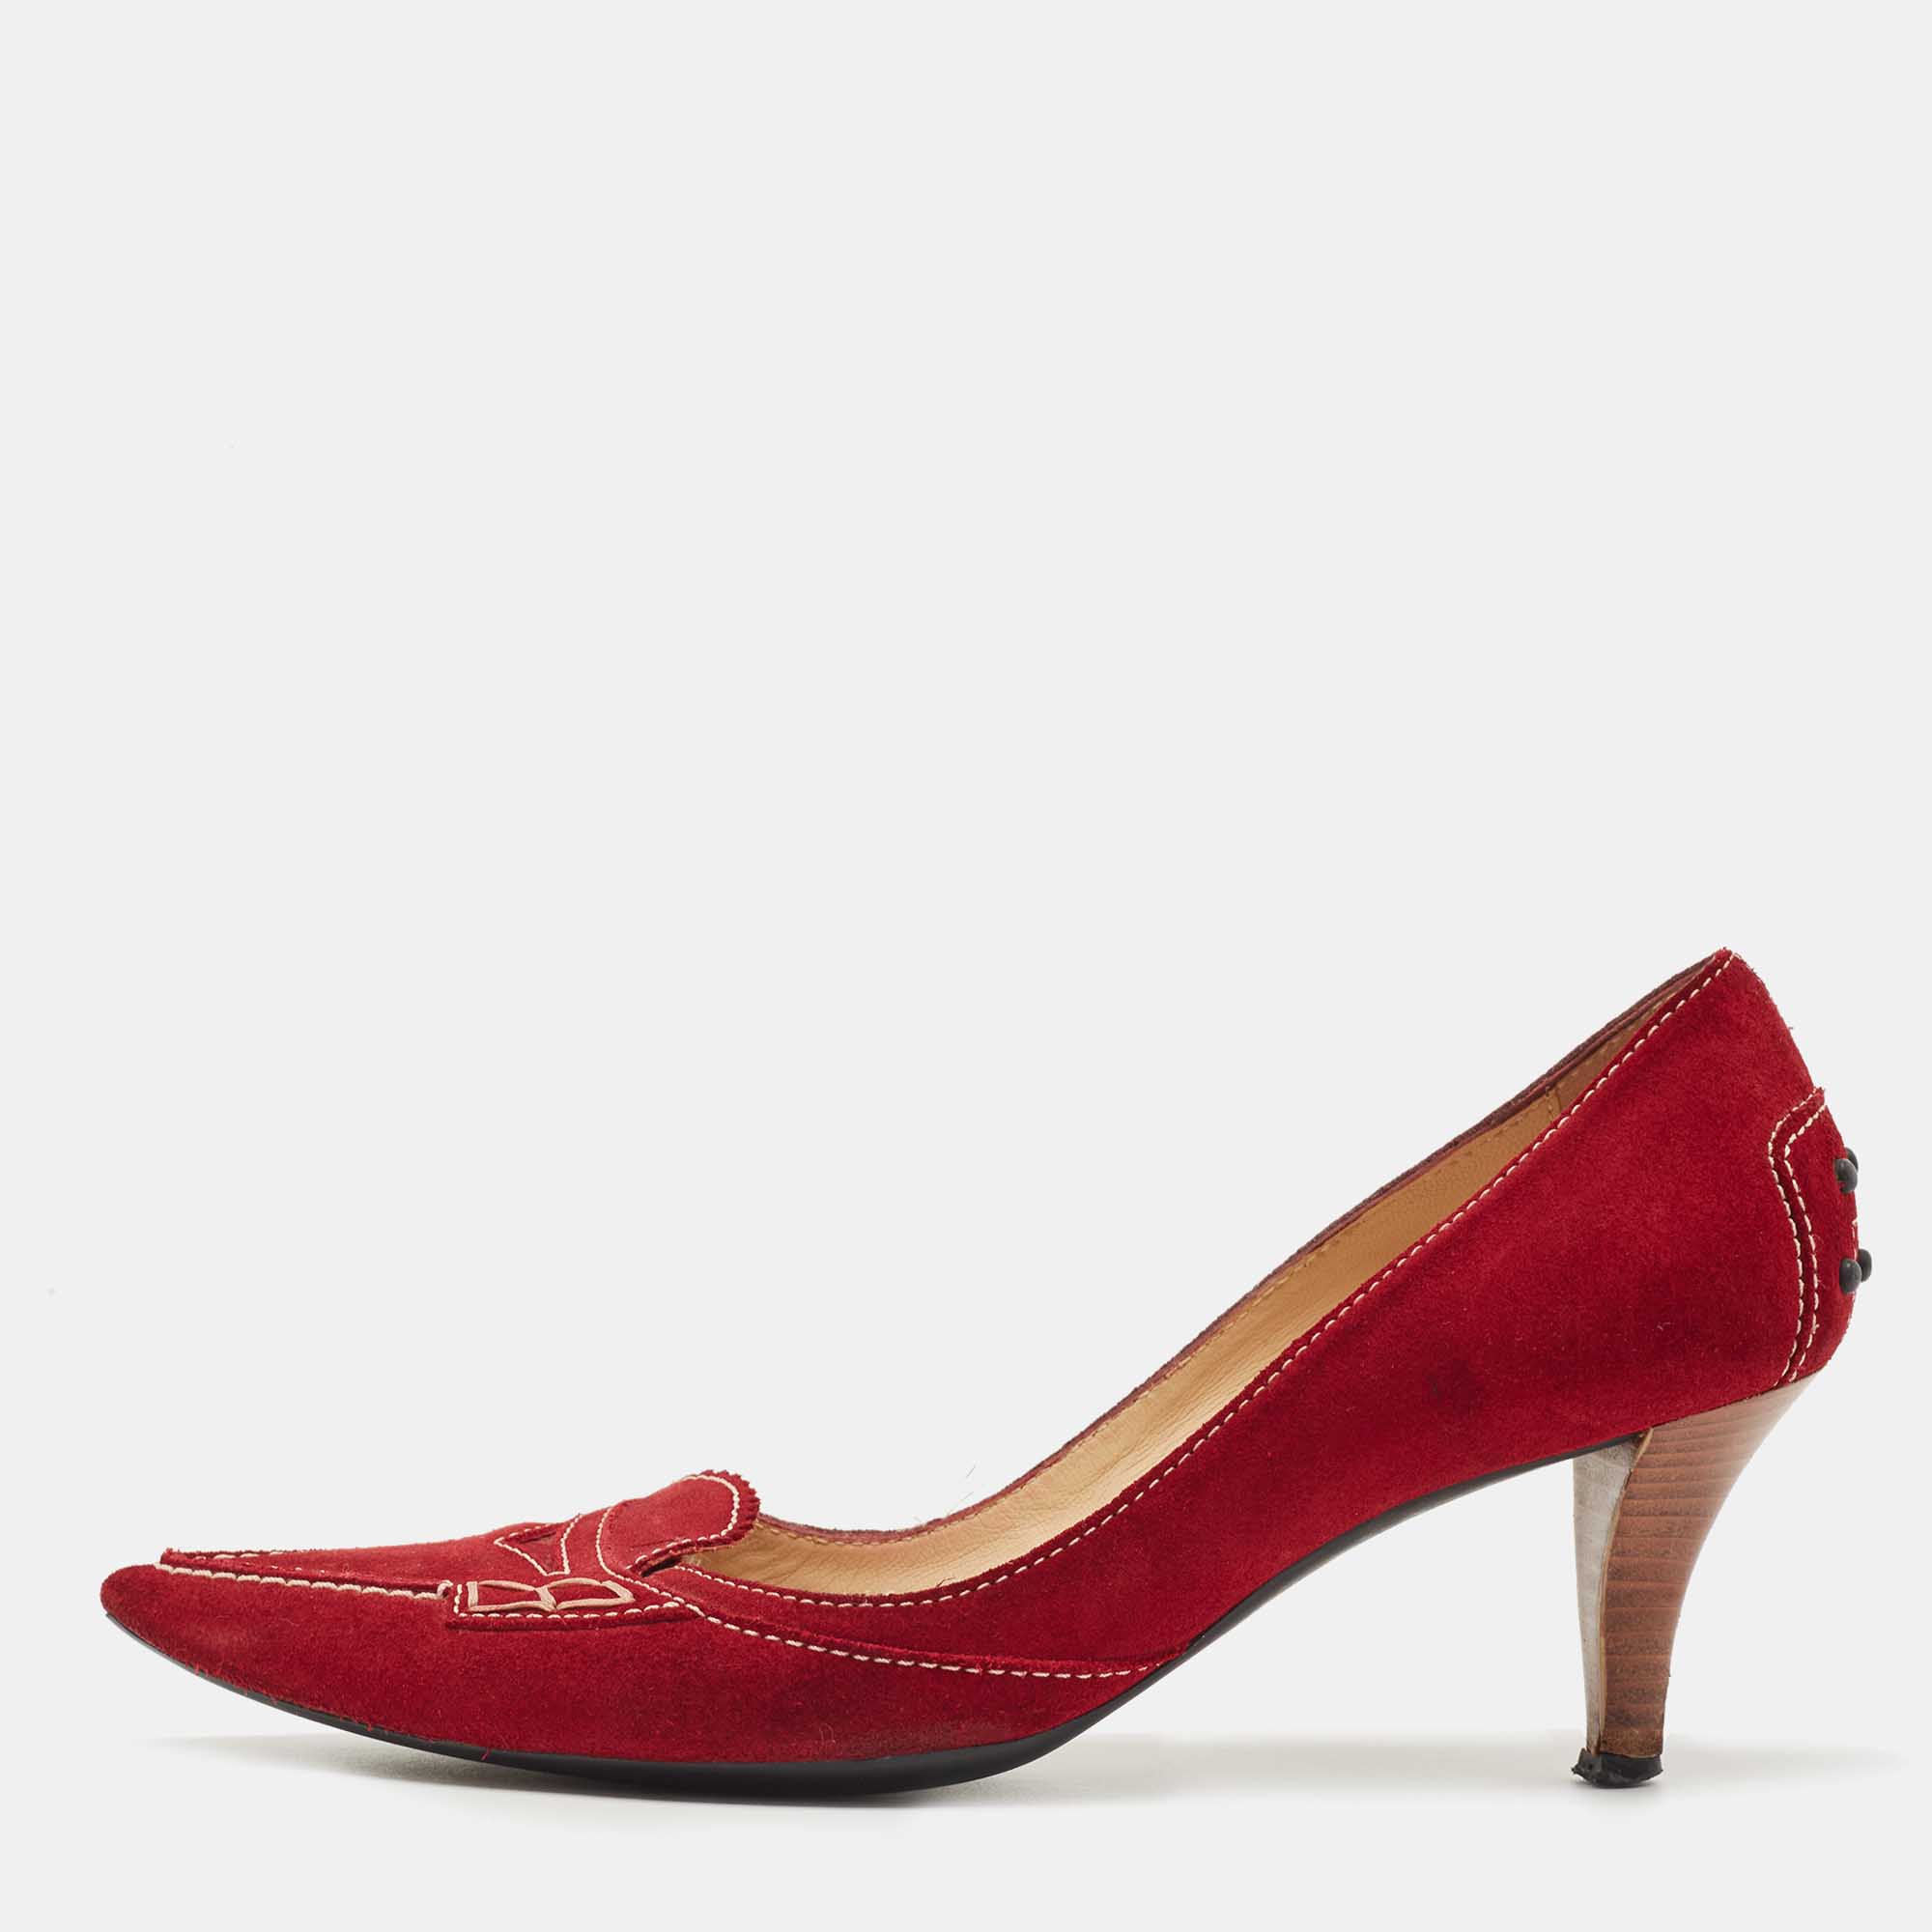 Tod's dark red suede loafer pumps size 39